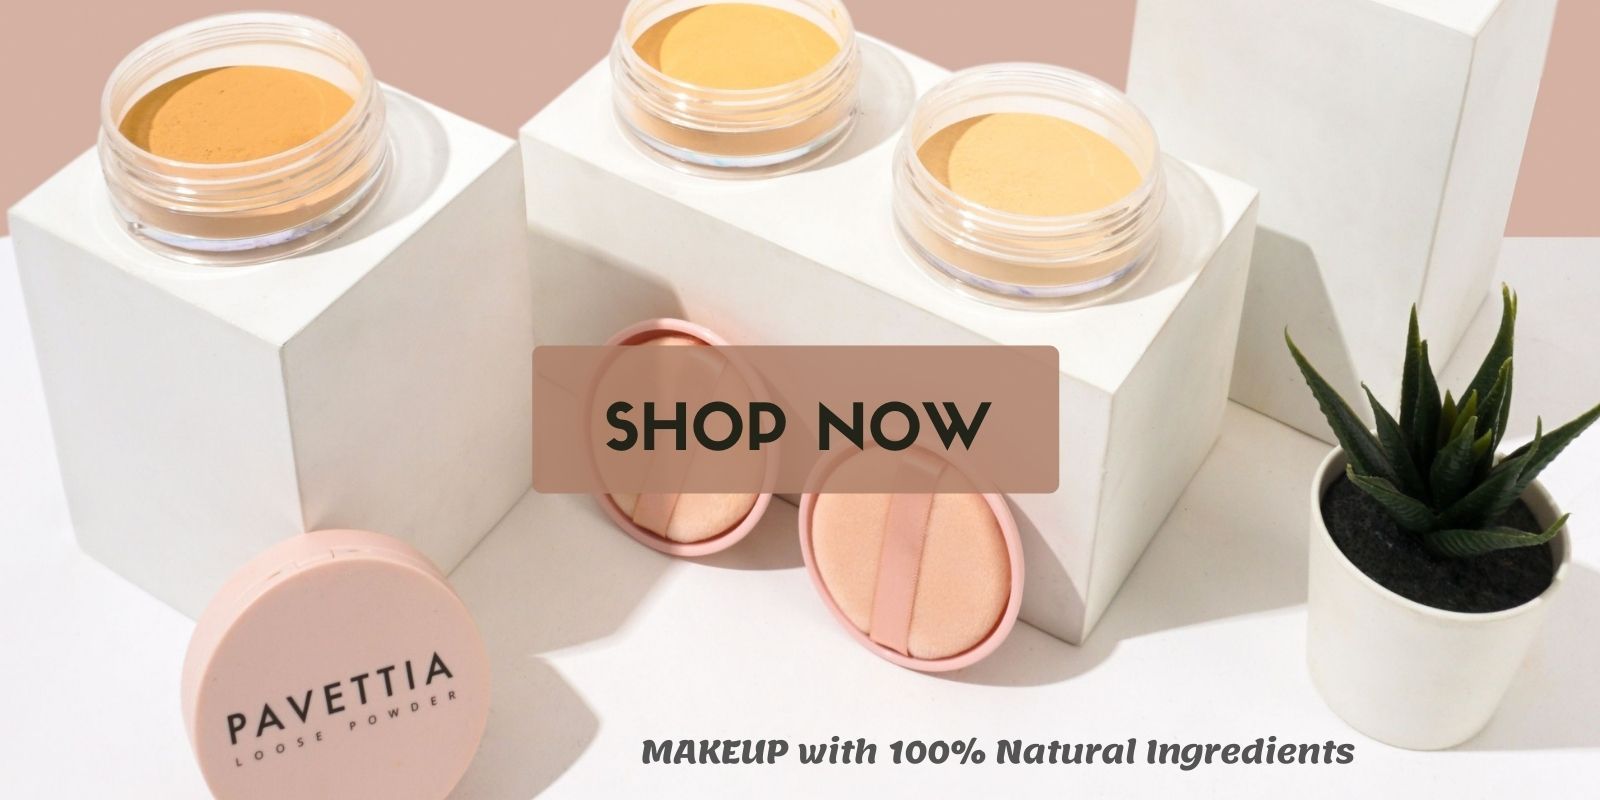 Natural Skin Care - From Farm to Beauty - PAVETTIA 